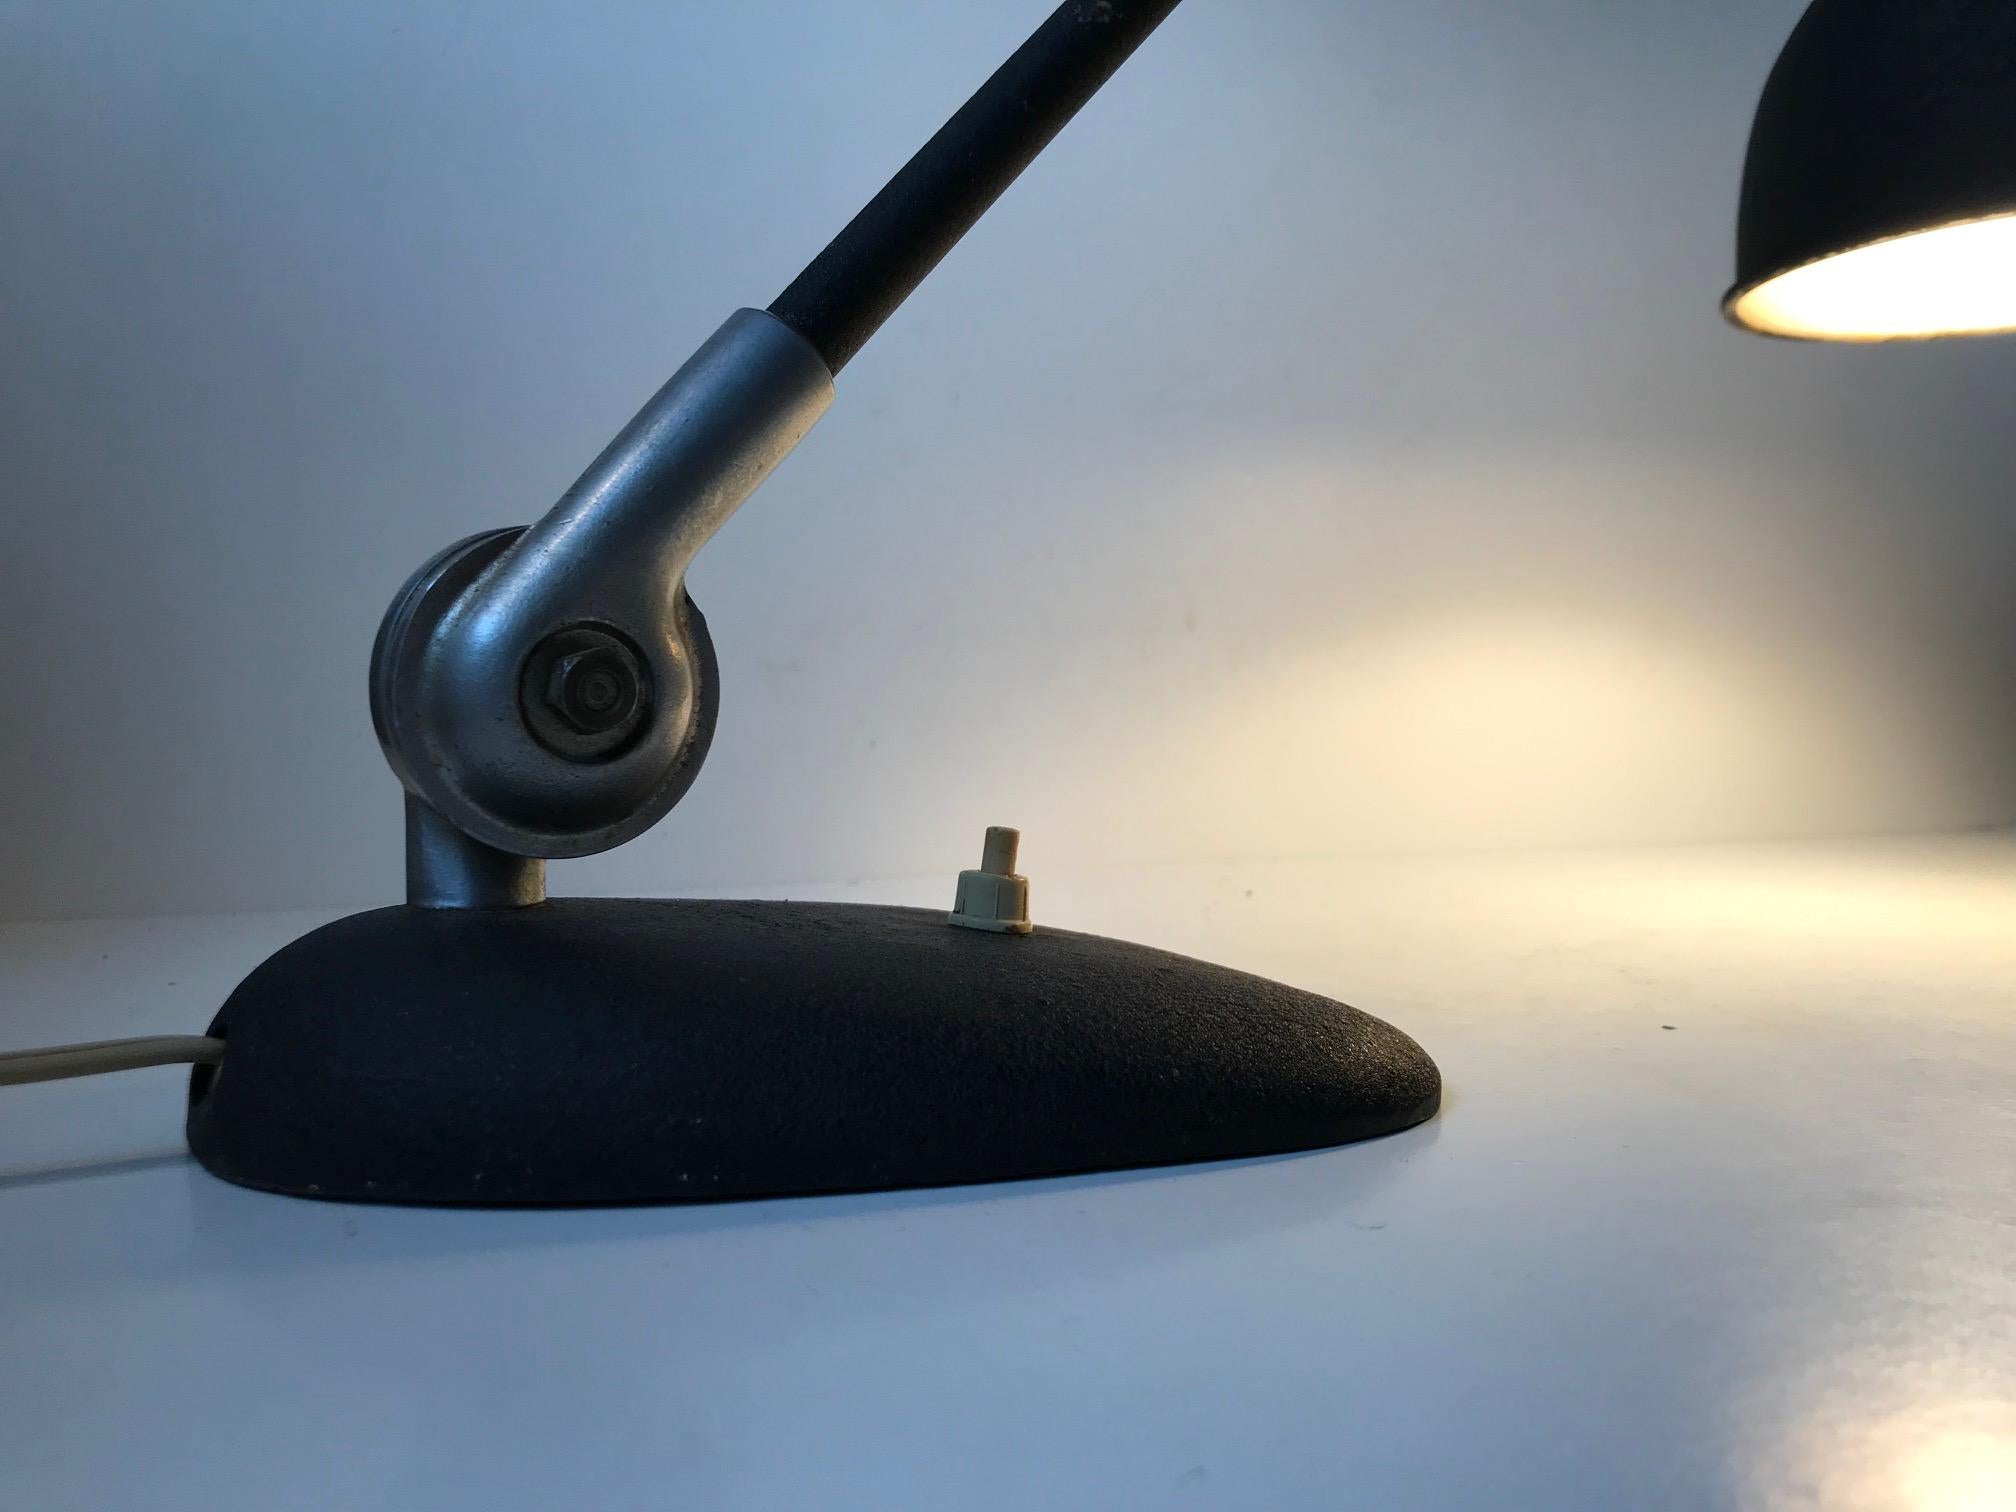 Black fully adjustable desk or table light from ASAS. It was manufactured in Denmark during the 1940s greatly inspired by the Bauhaus Movement with lighting. 
It features original textured paint. Stamped to the top: ASAS, AEP, Pat.